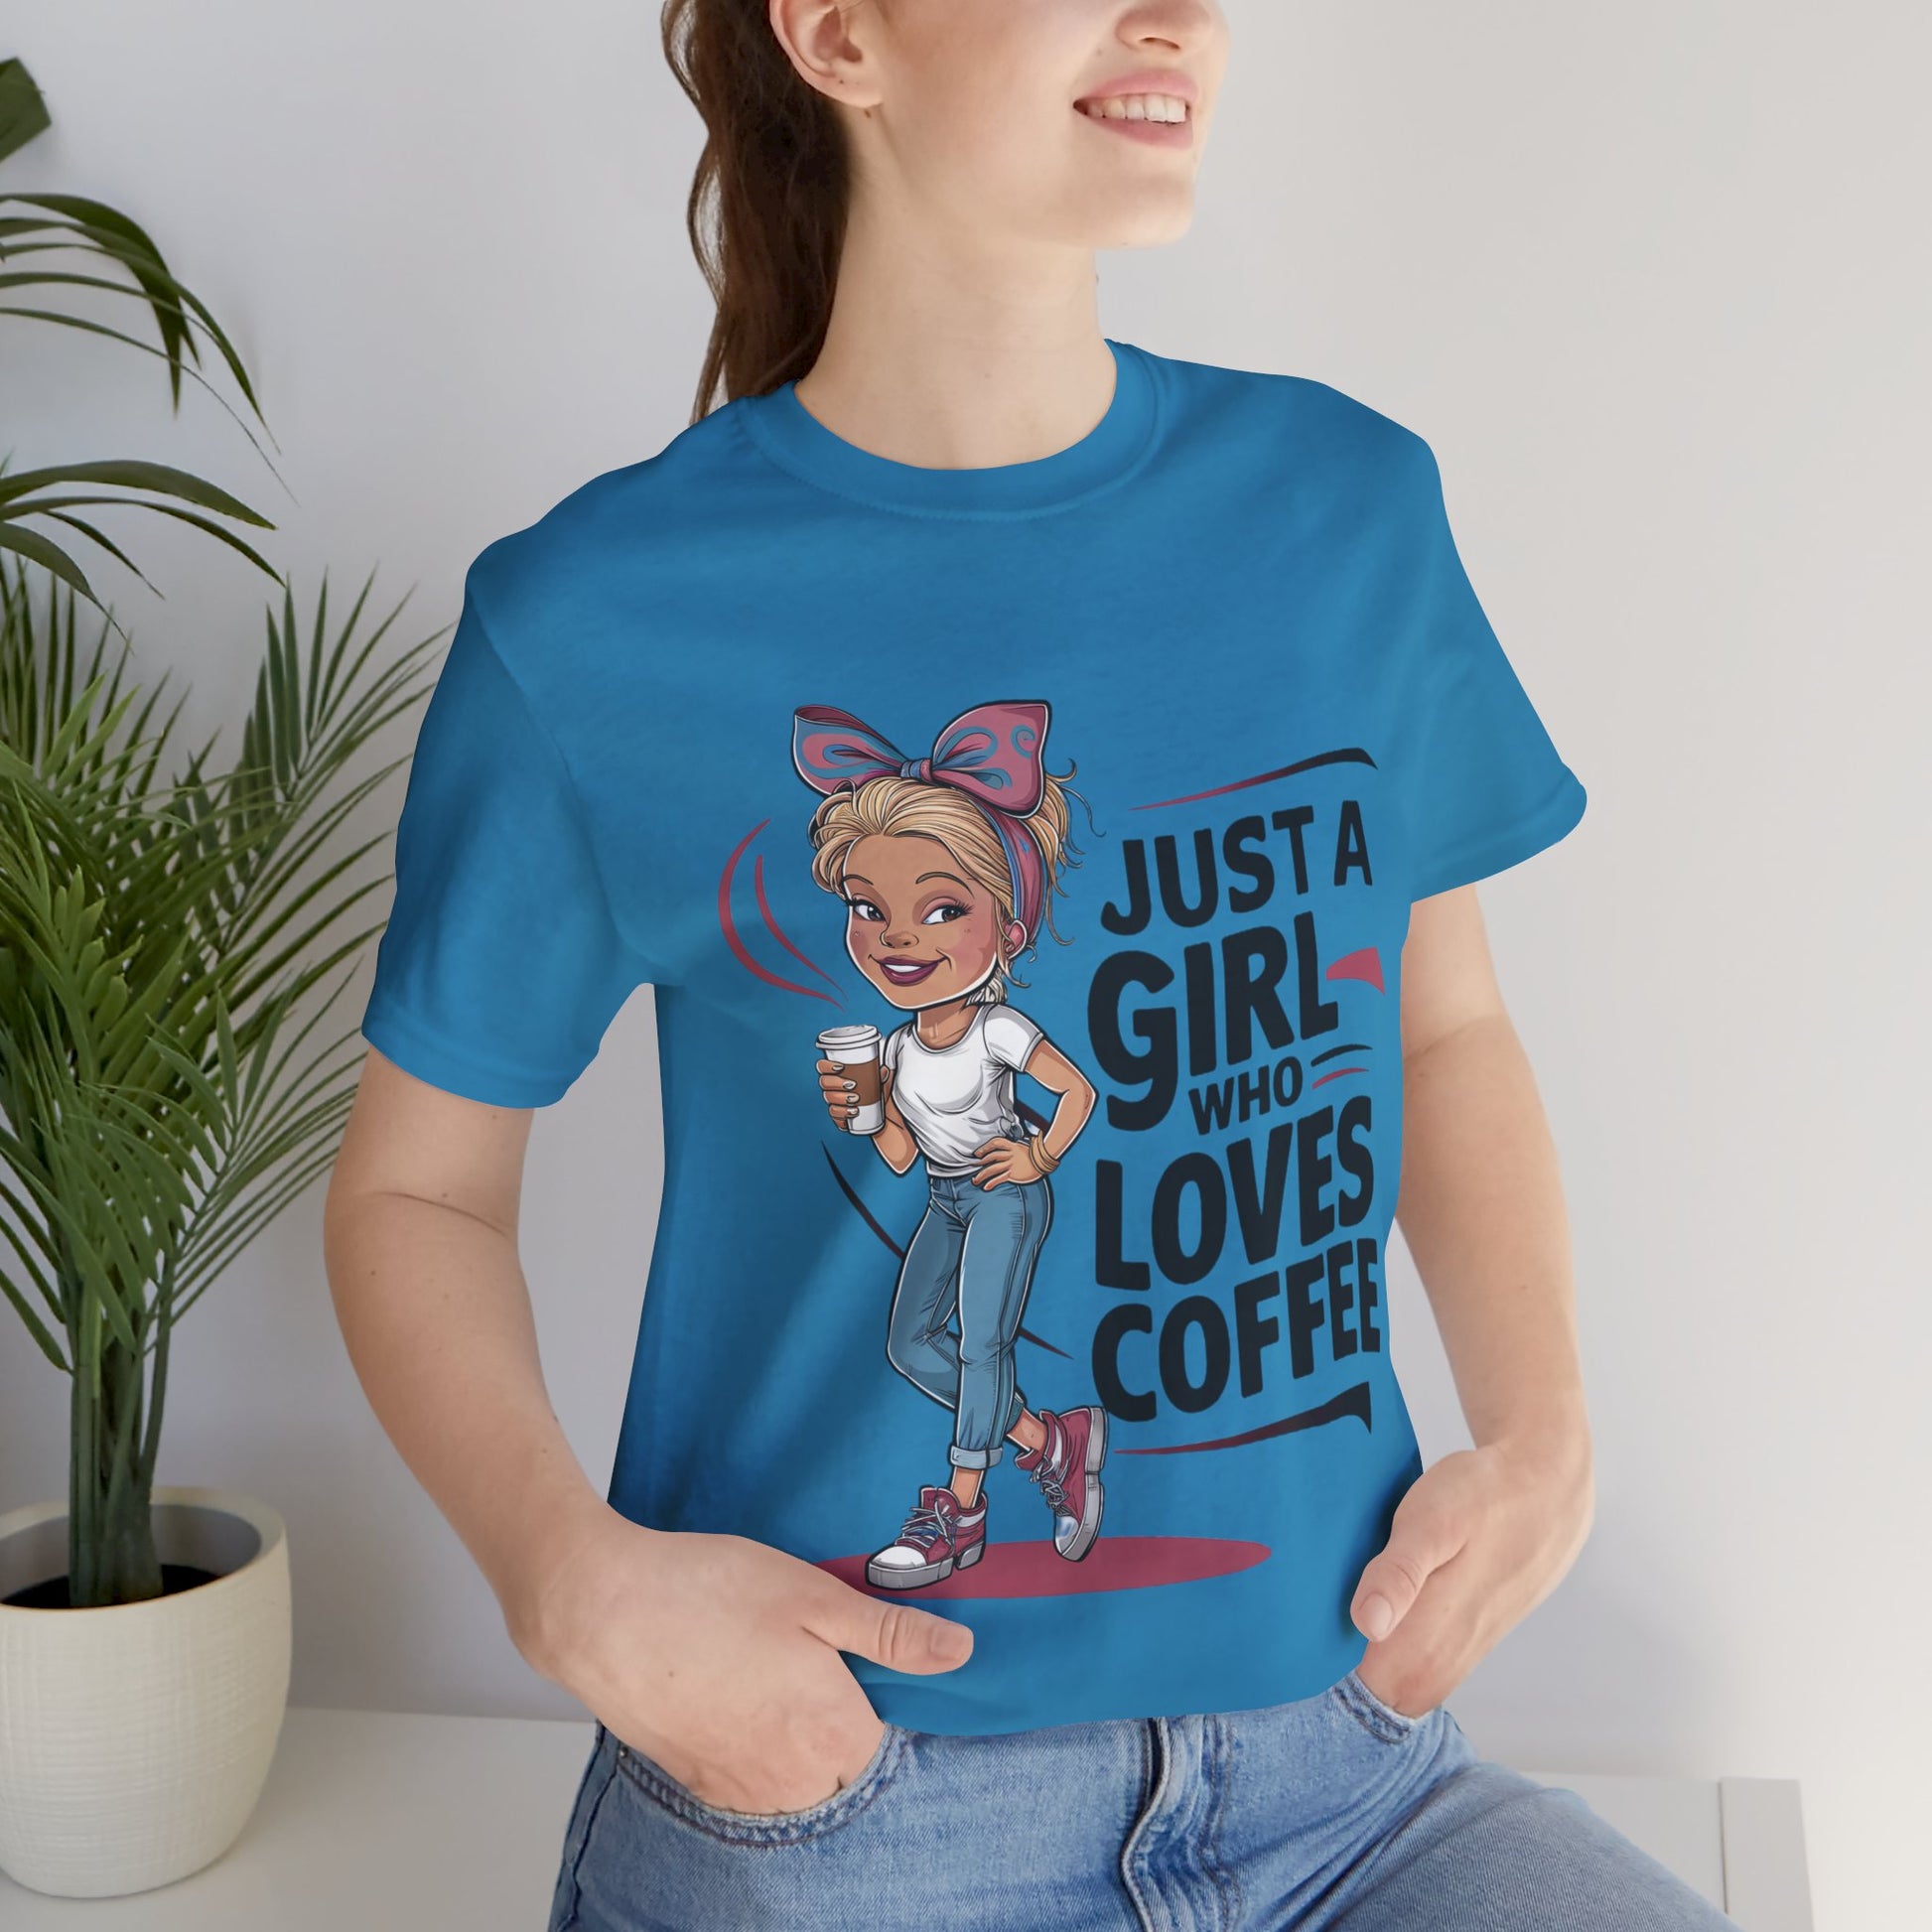 "Just a Girl Who Loves Coffee" Unisex Jersey Tee | Coffee Time Classics - Coffee Time Classics